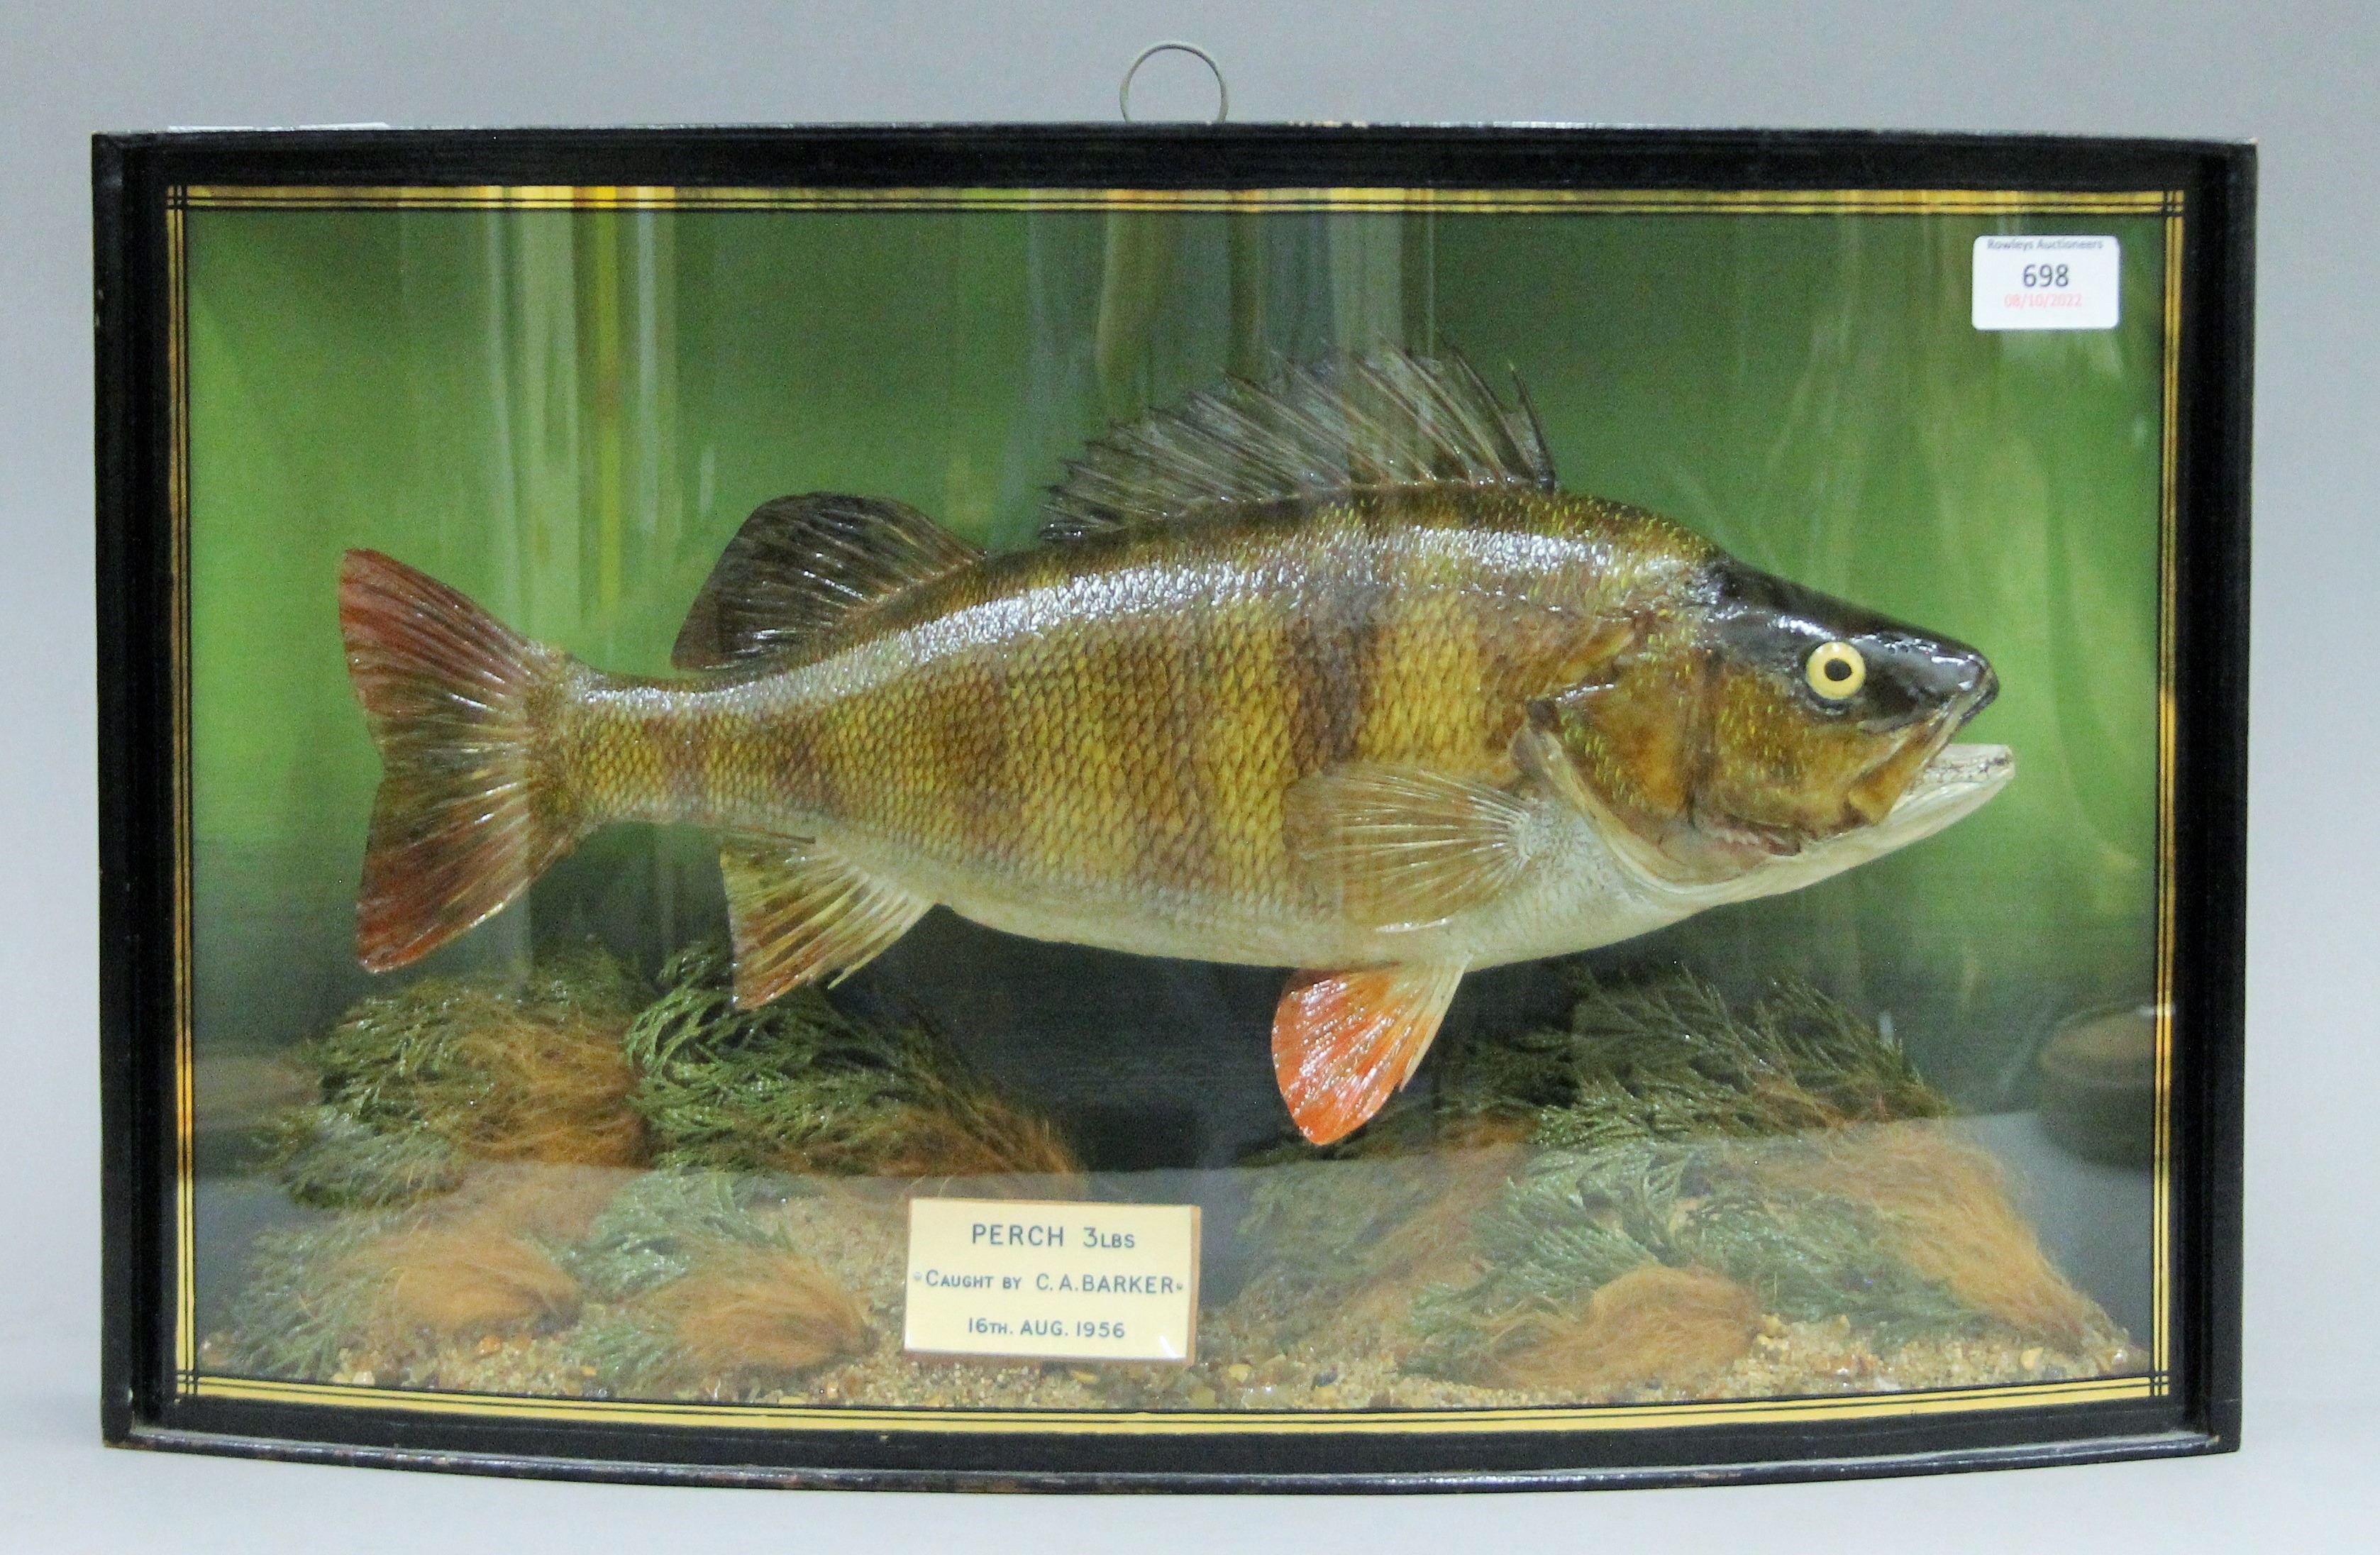 A taxidermy specimen of a preserved Perch (Perca fluviatilis) by J Cooper & Sons (Griggs) mounted